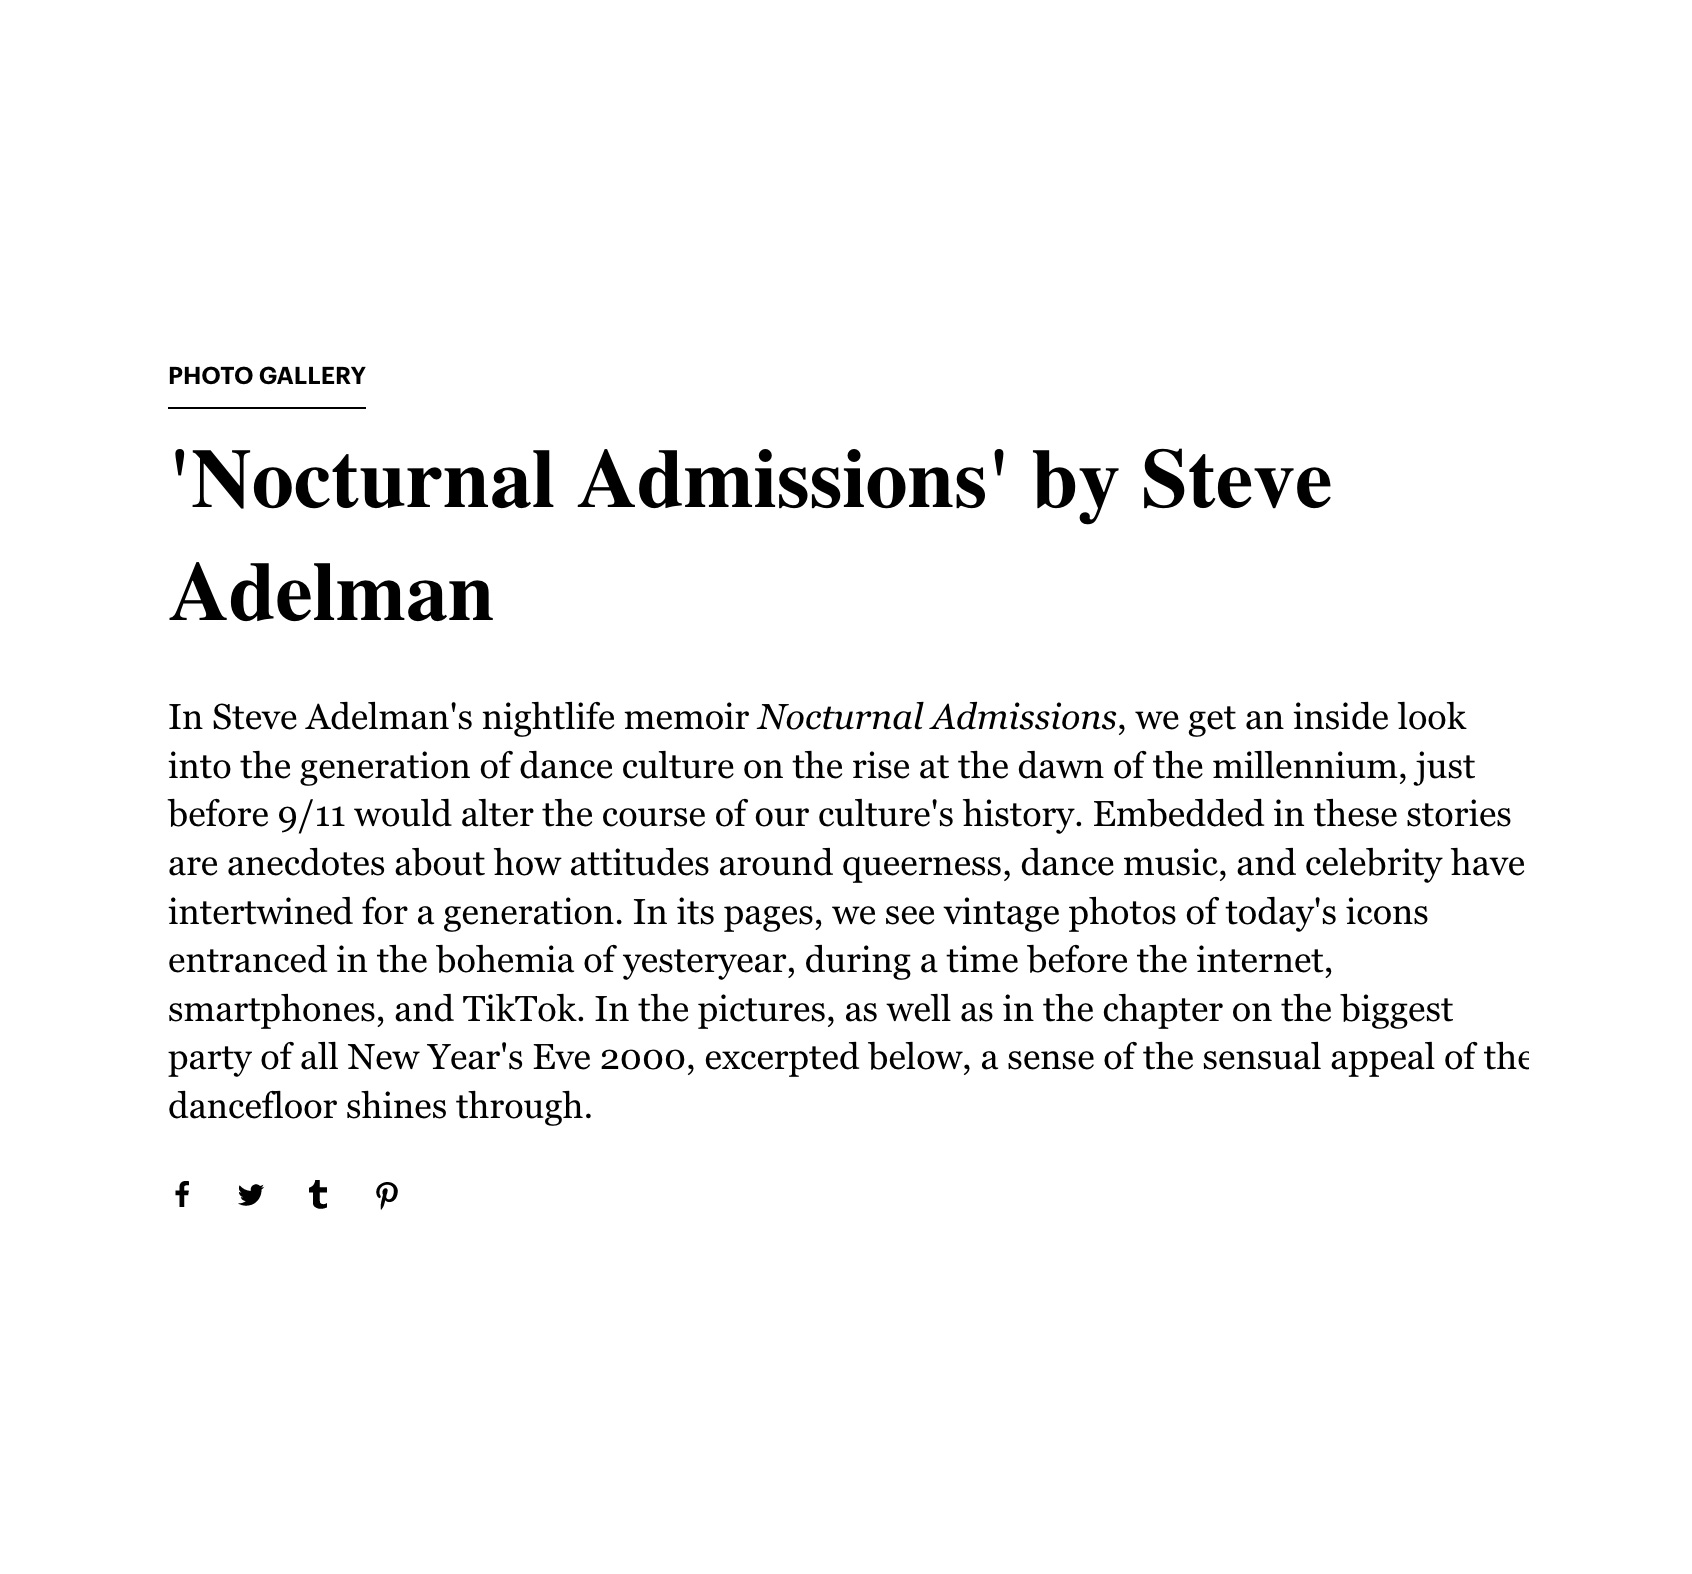 nocturnal admissions press rolling stones photo gallery